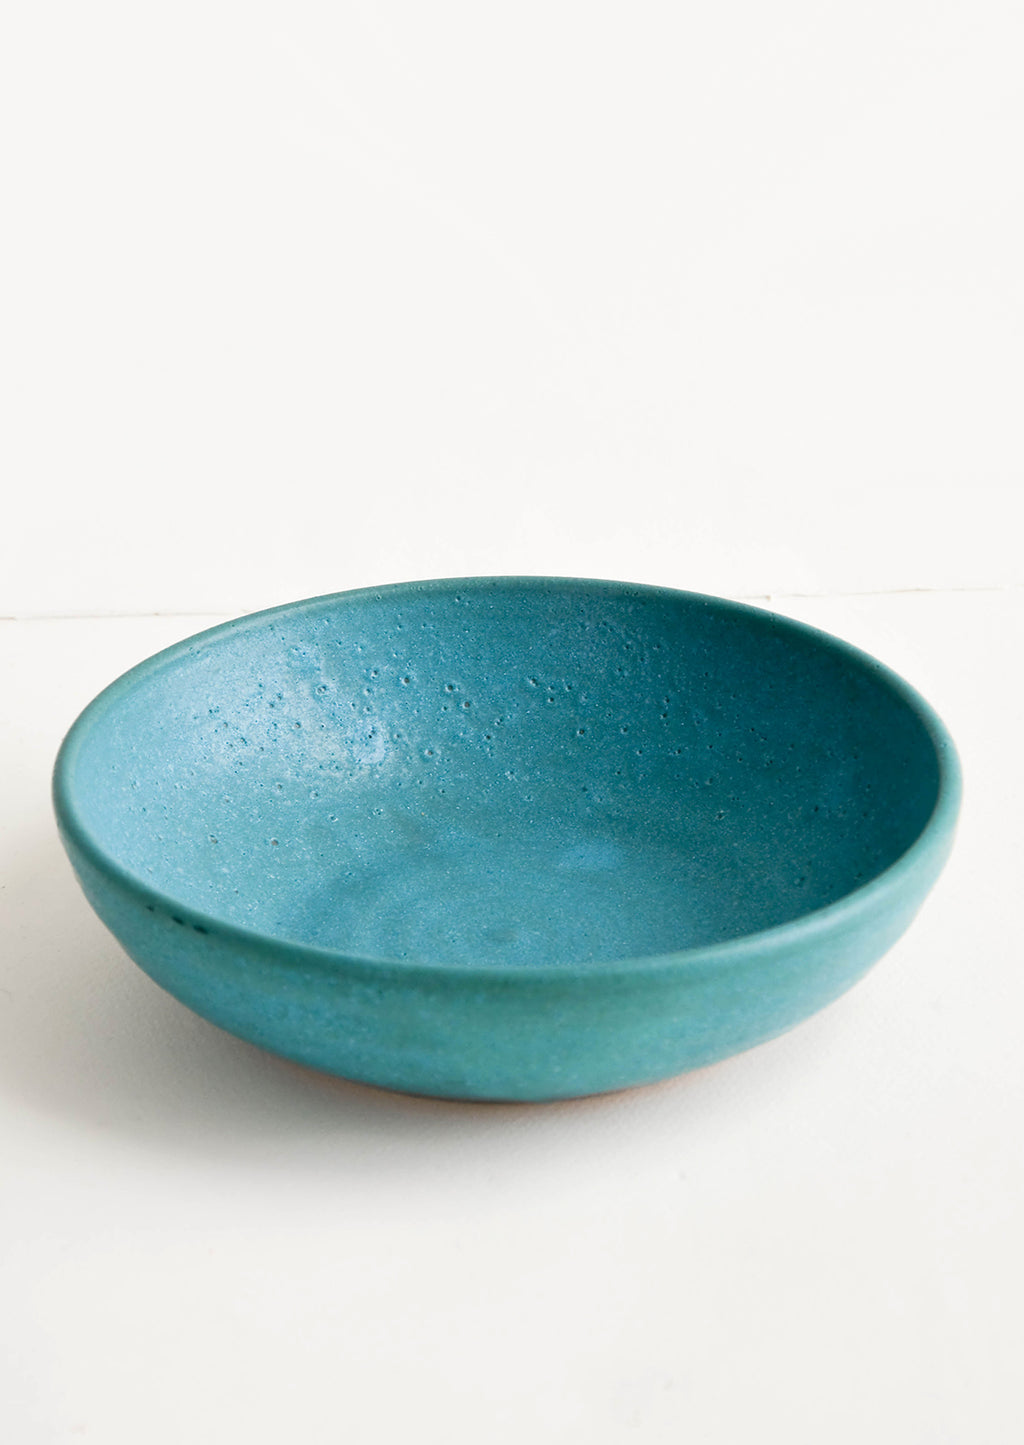 Salad Bowl / Rustic Turquoise: Handmade ceramic bowl in wide, shallow shape and rustic turquoise glaze